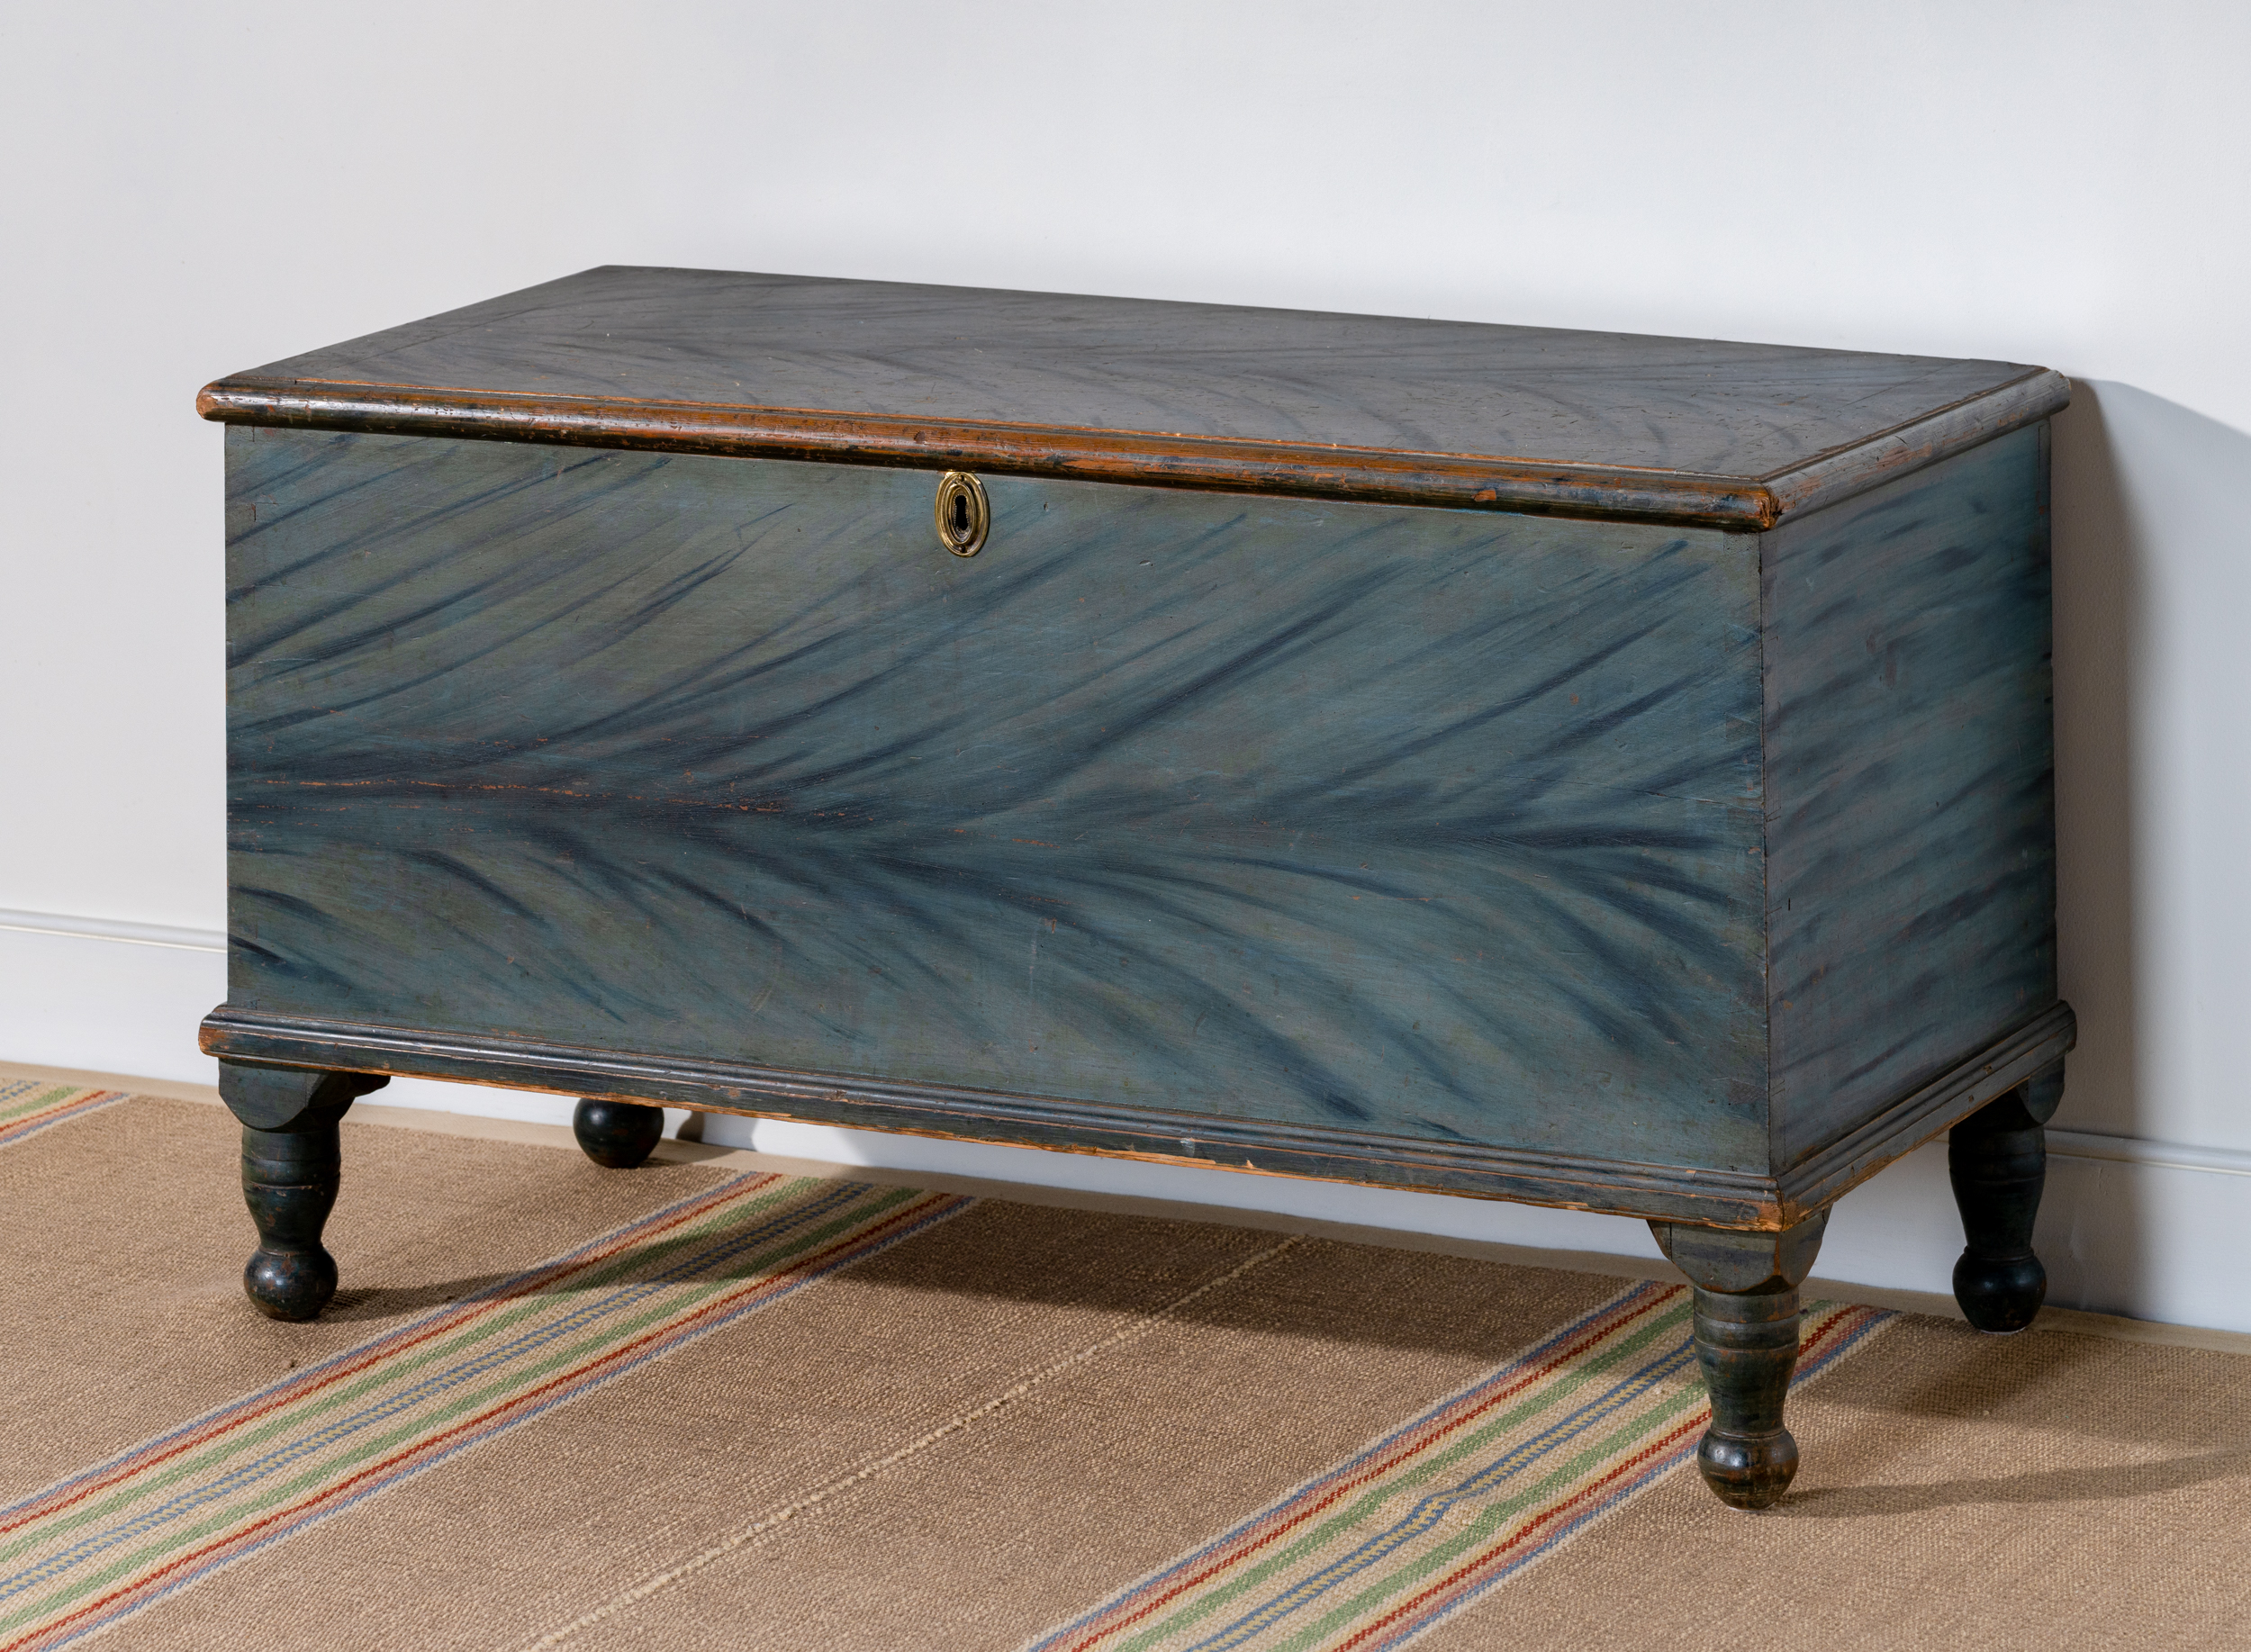 blue-painted blanket chest rel=